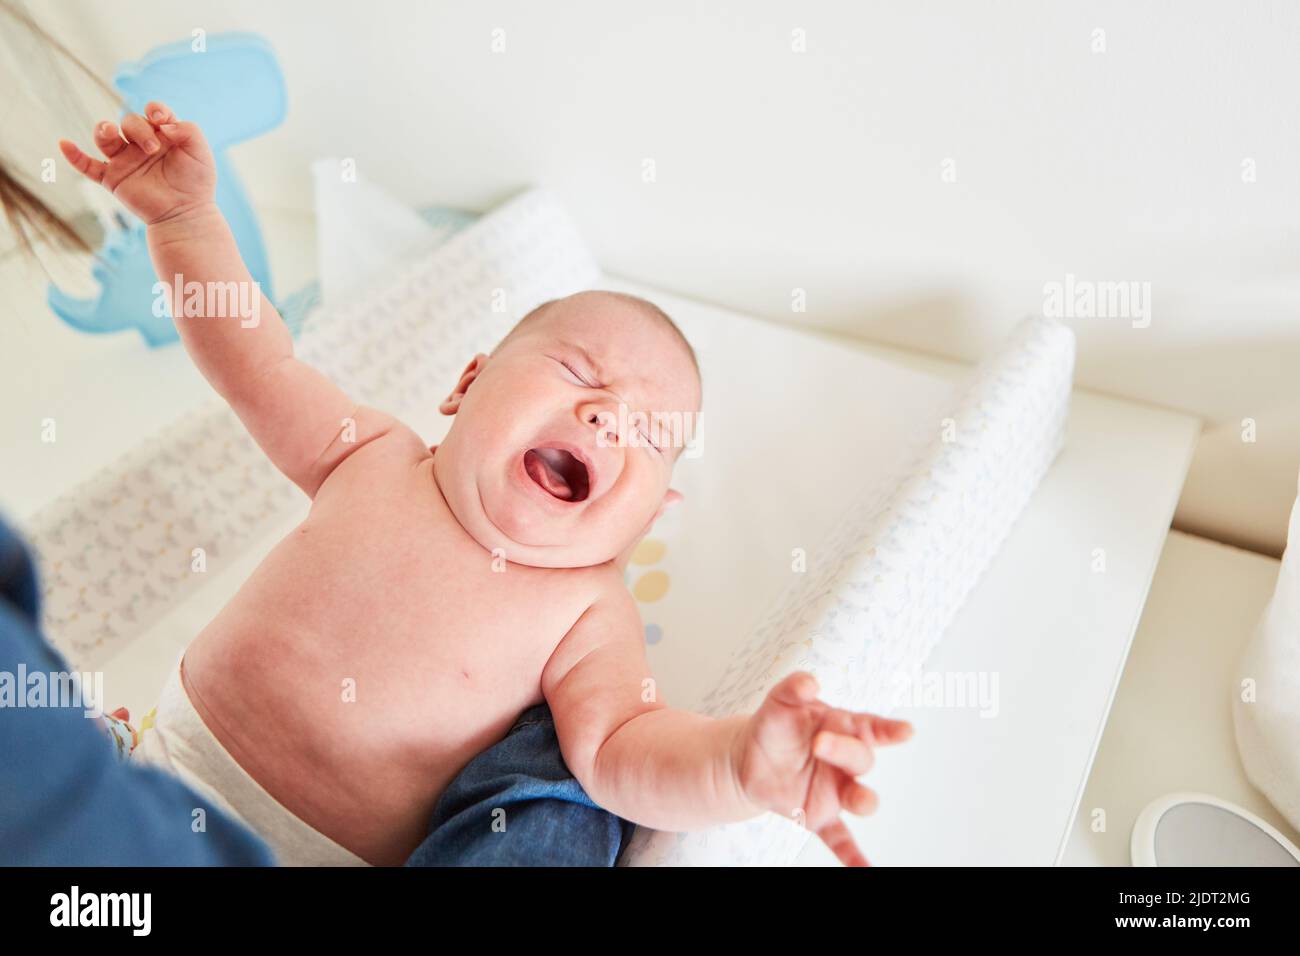 Mother changing the diaper of a crying baby on the changing mat Stock Photo